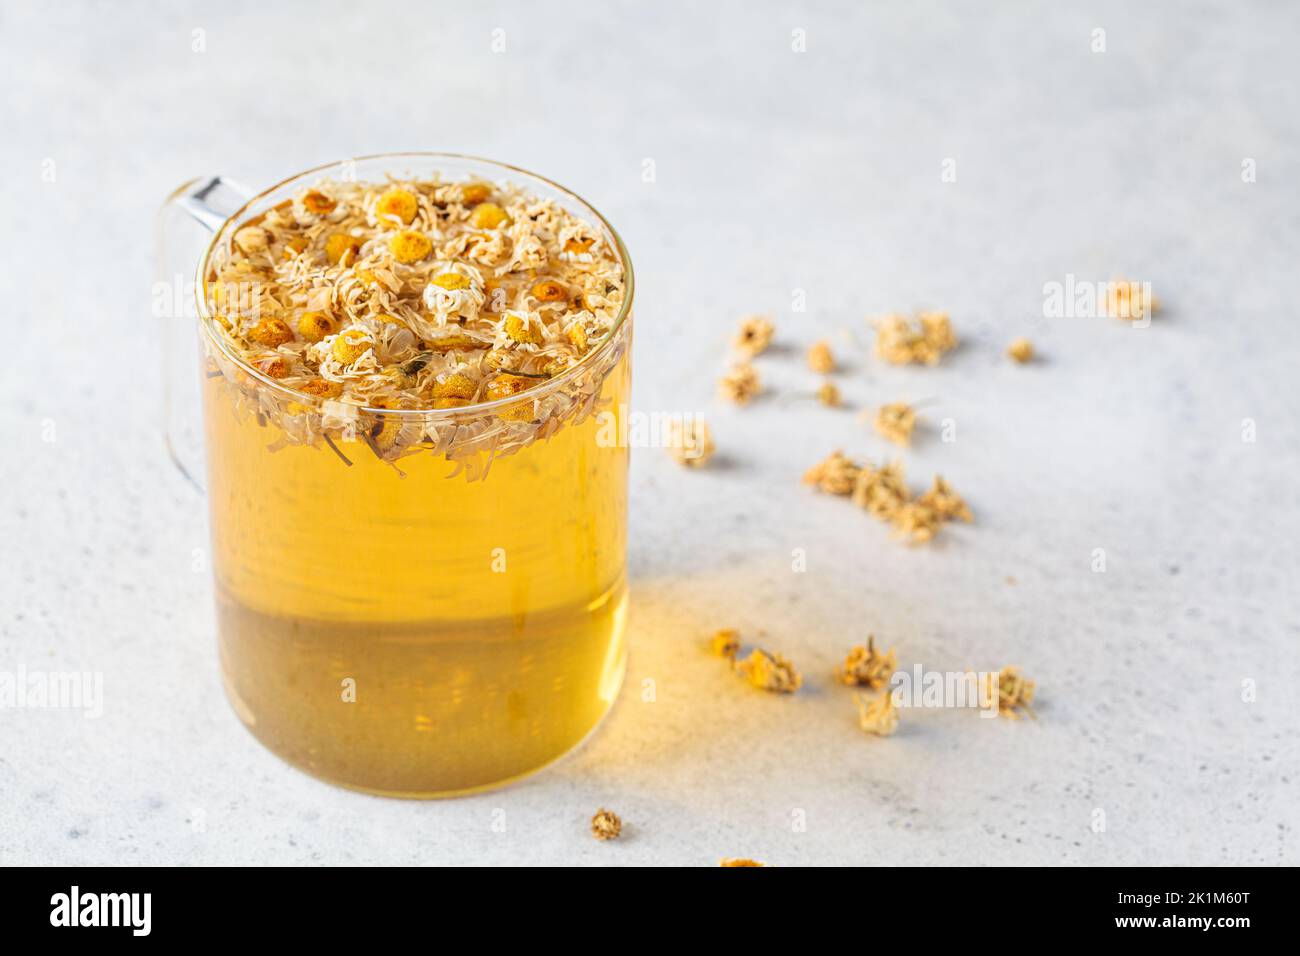 Chamomile tea with flowers in a glass cup. Healthy herbal drink, natural antiseptic and aid in digestion. Stock Photo